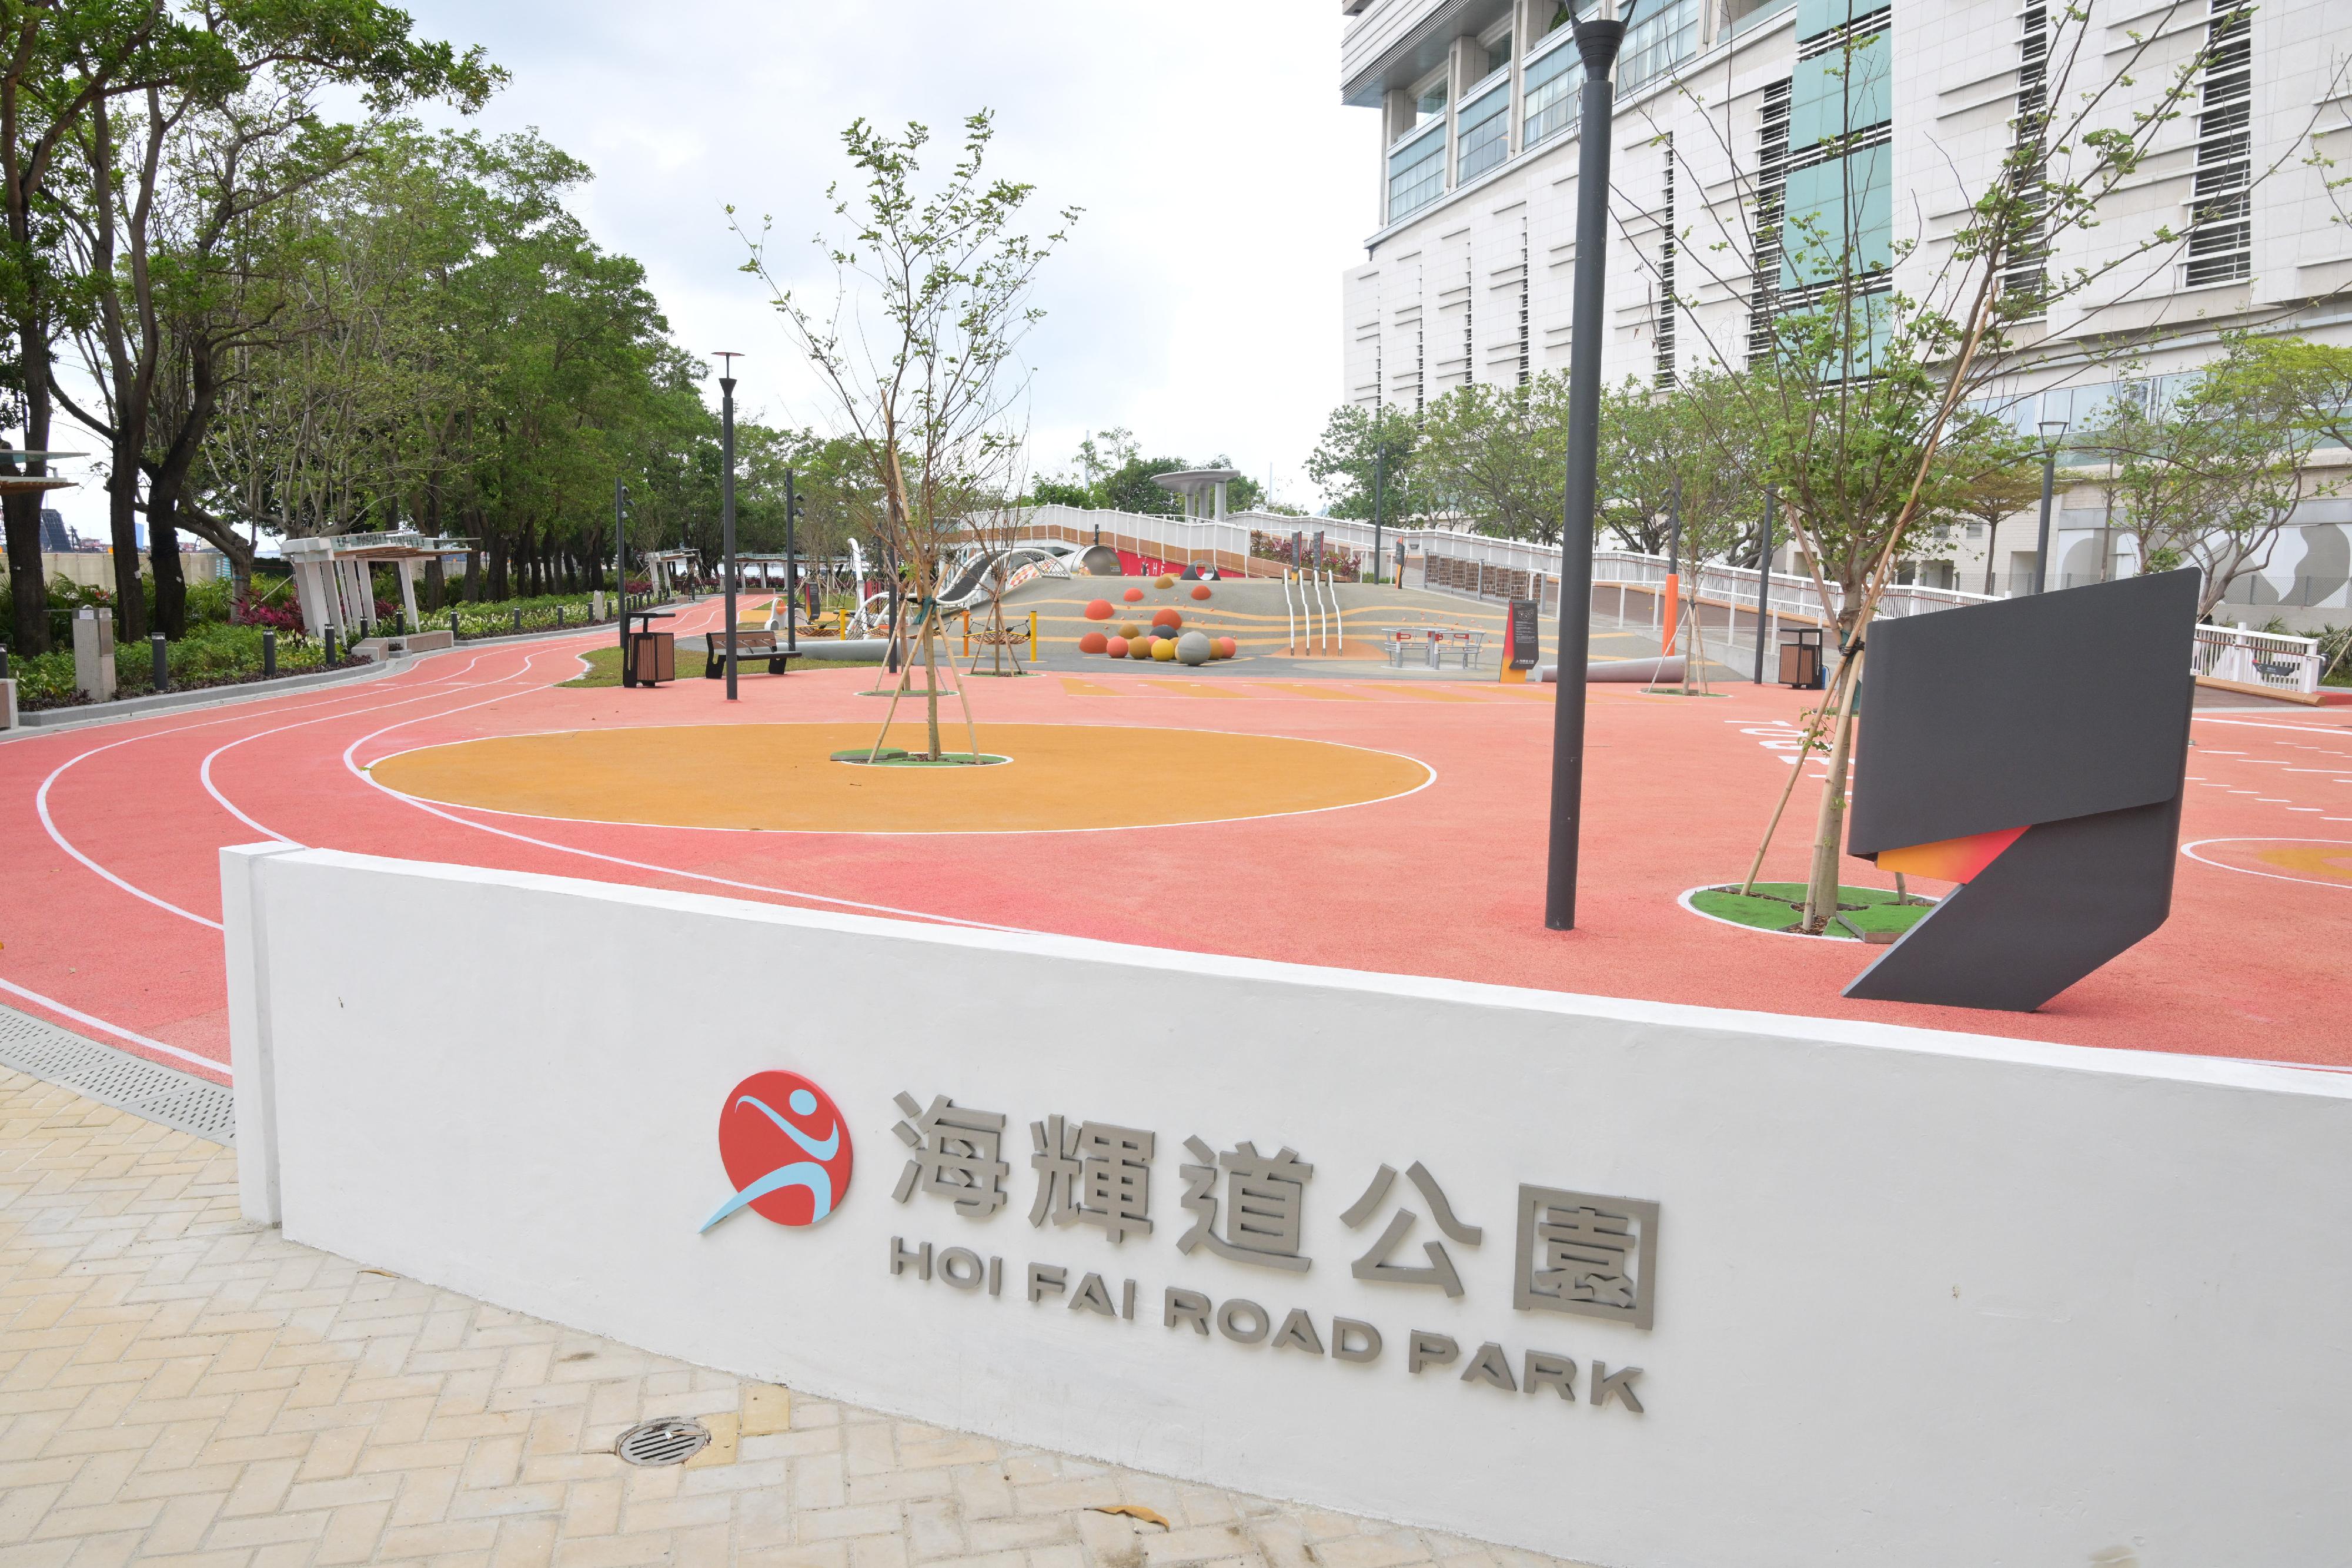 The Leisure and Cultural Services Department announced that the Hoi Fai Road open space in Tai Kok Tsui has been merged with Hoi Fai Road Garden and renamed as Hoi Fai Road Park, which is open for public use from today (April 10).